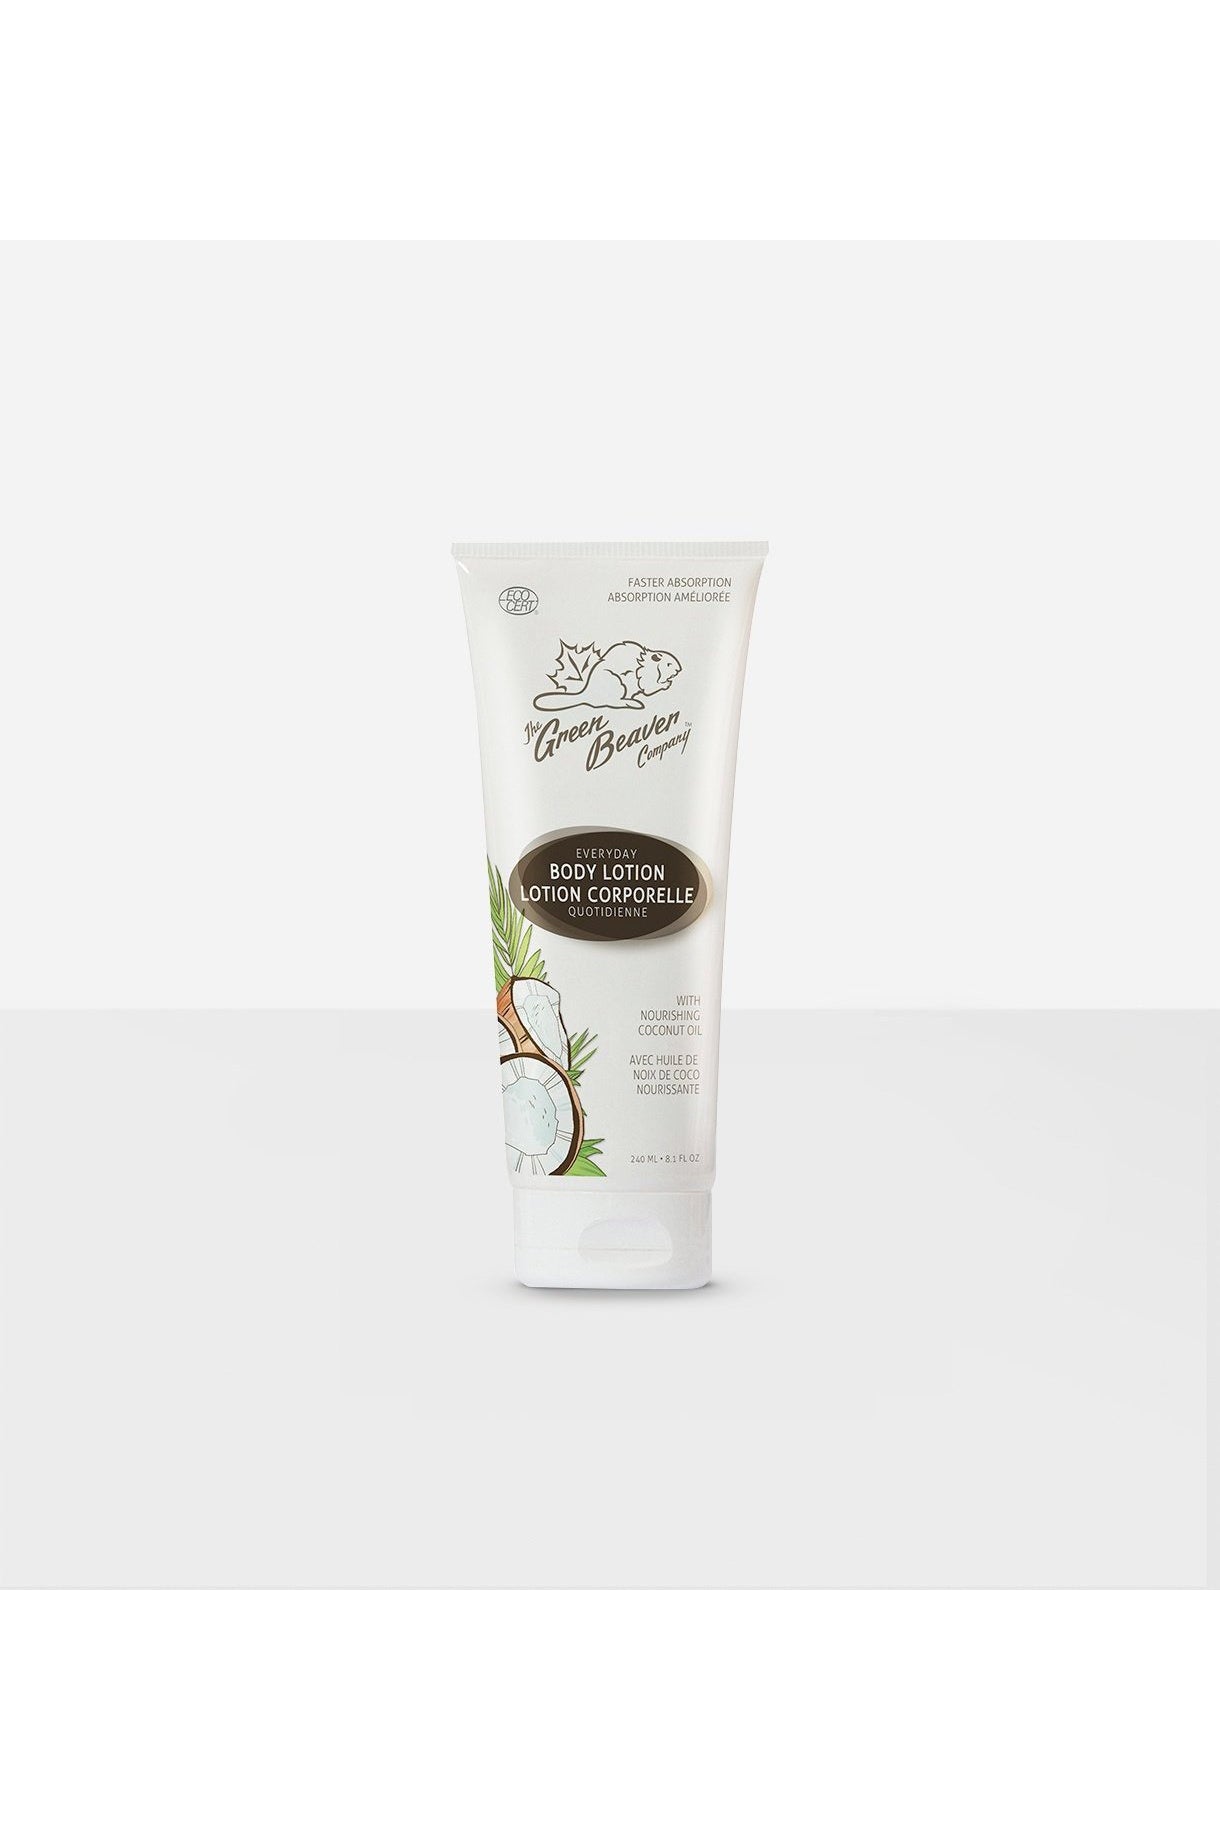 Green Beaver Coconut Natural Body Lotion 240ml